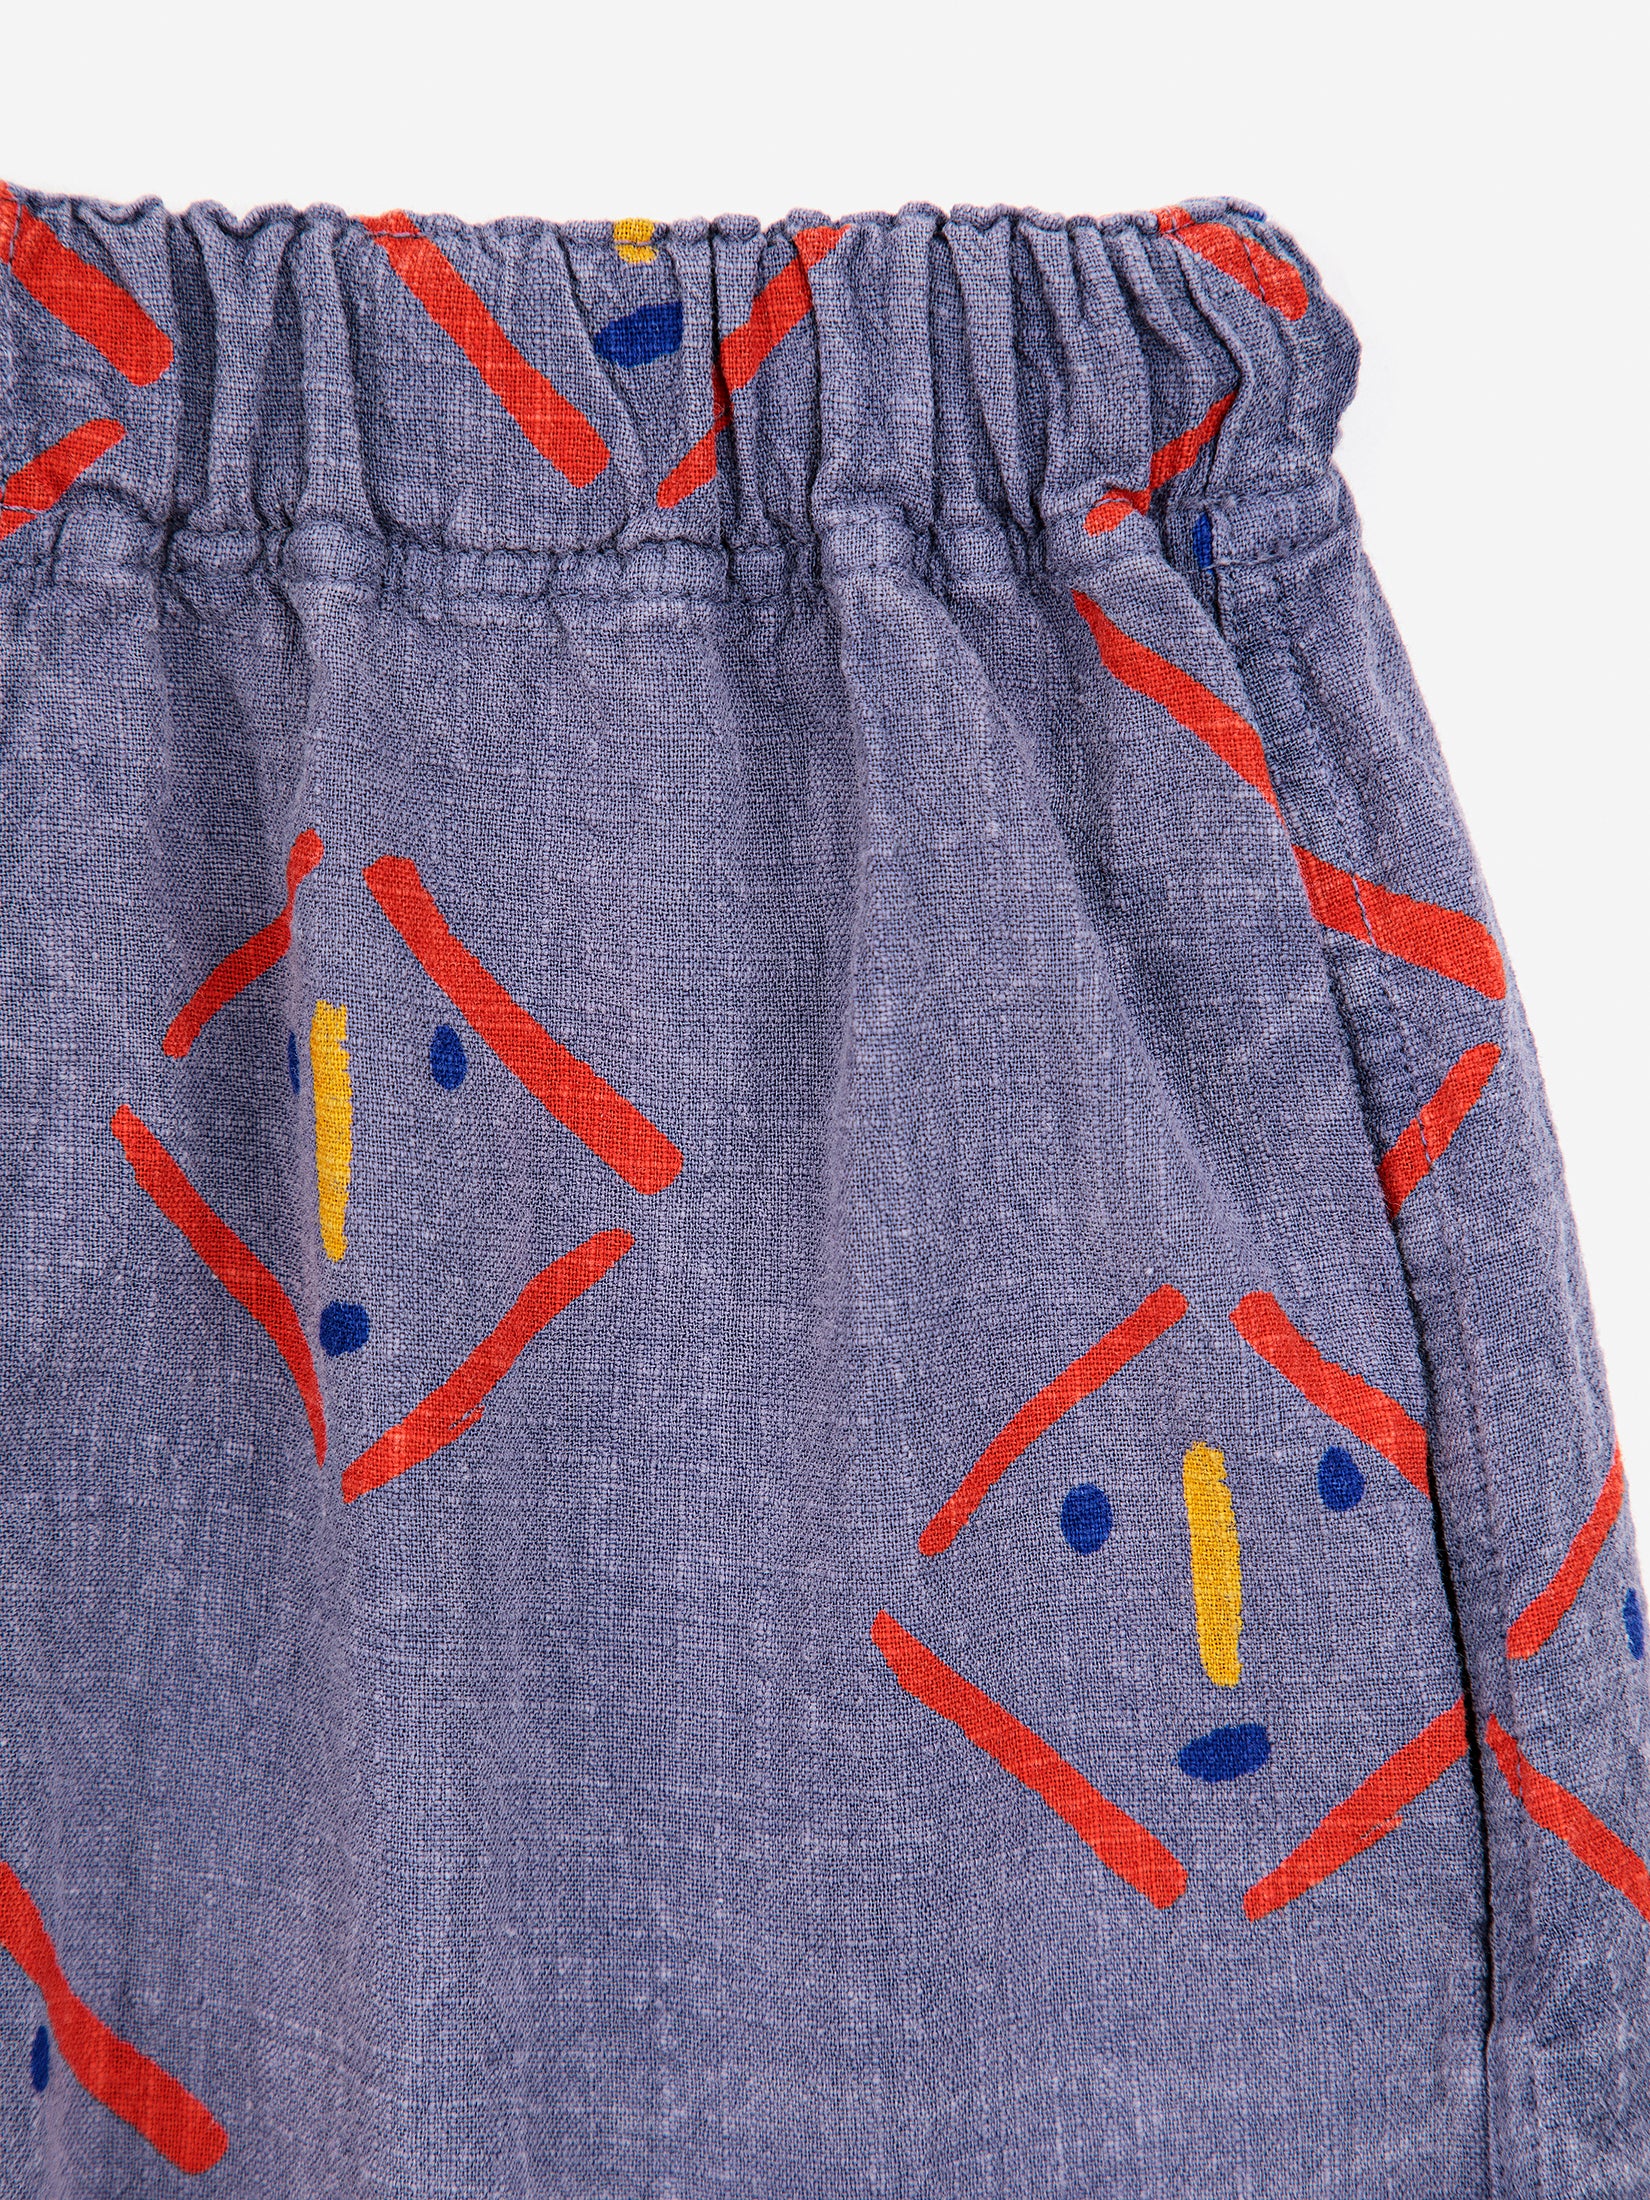 Bobo Choses Masks All Over Woven Shorts - Prussian Blue